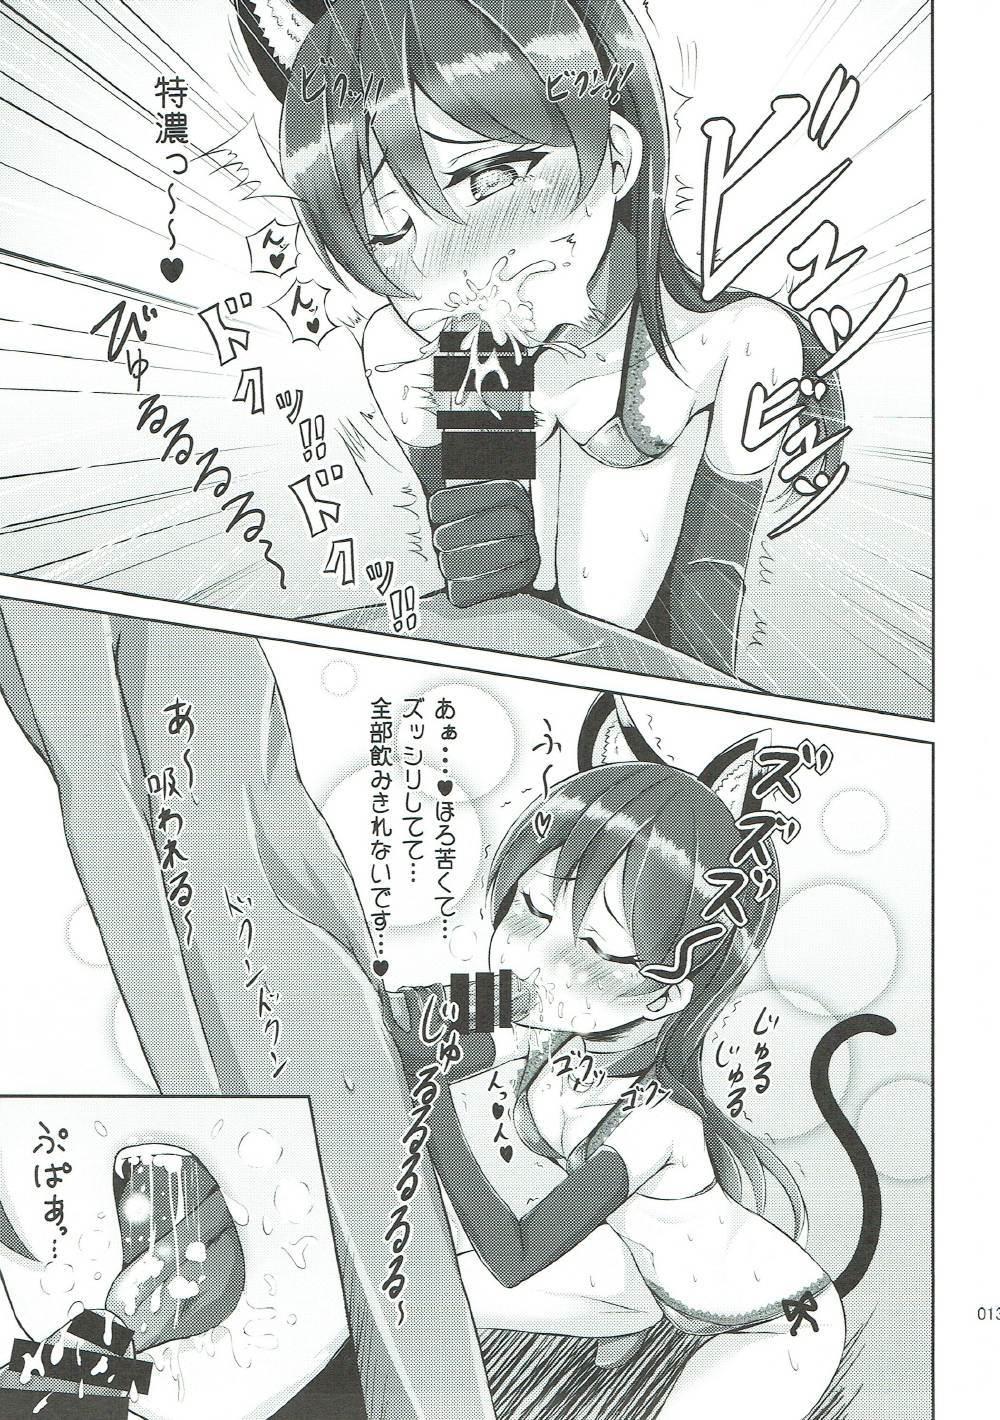 The Umi-chan to Nyannyan - Love live Gay Massage - Page 11